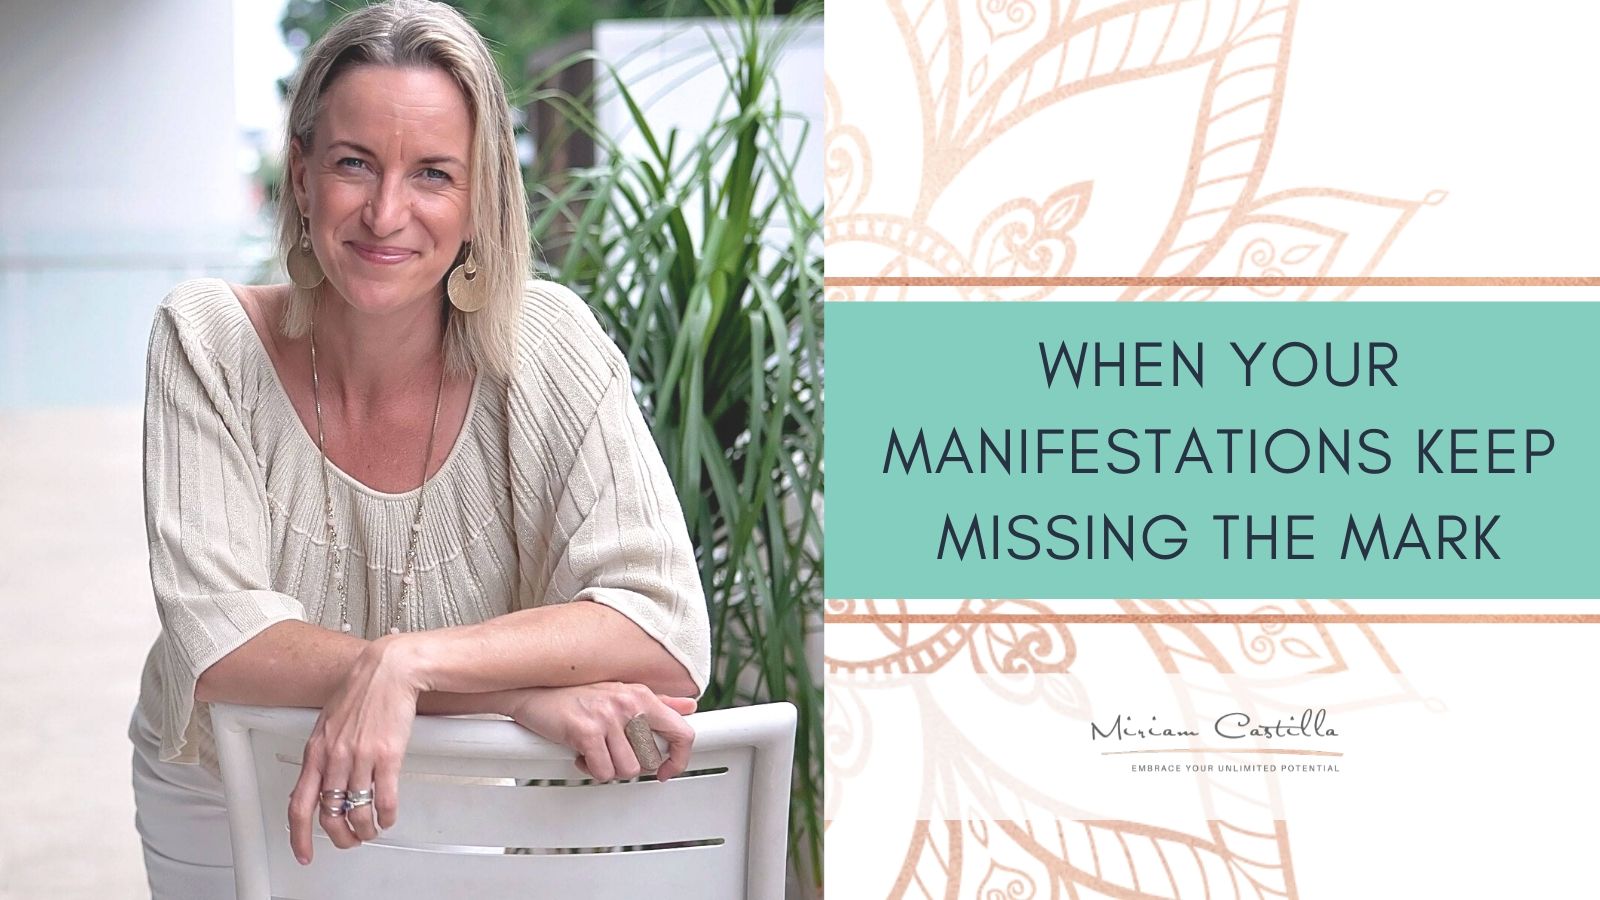 When your manifestations keep missing the mark